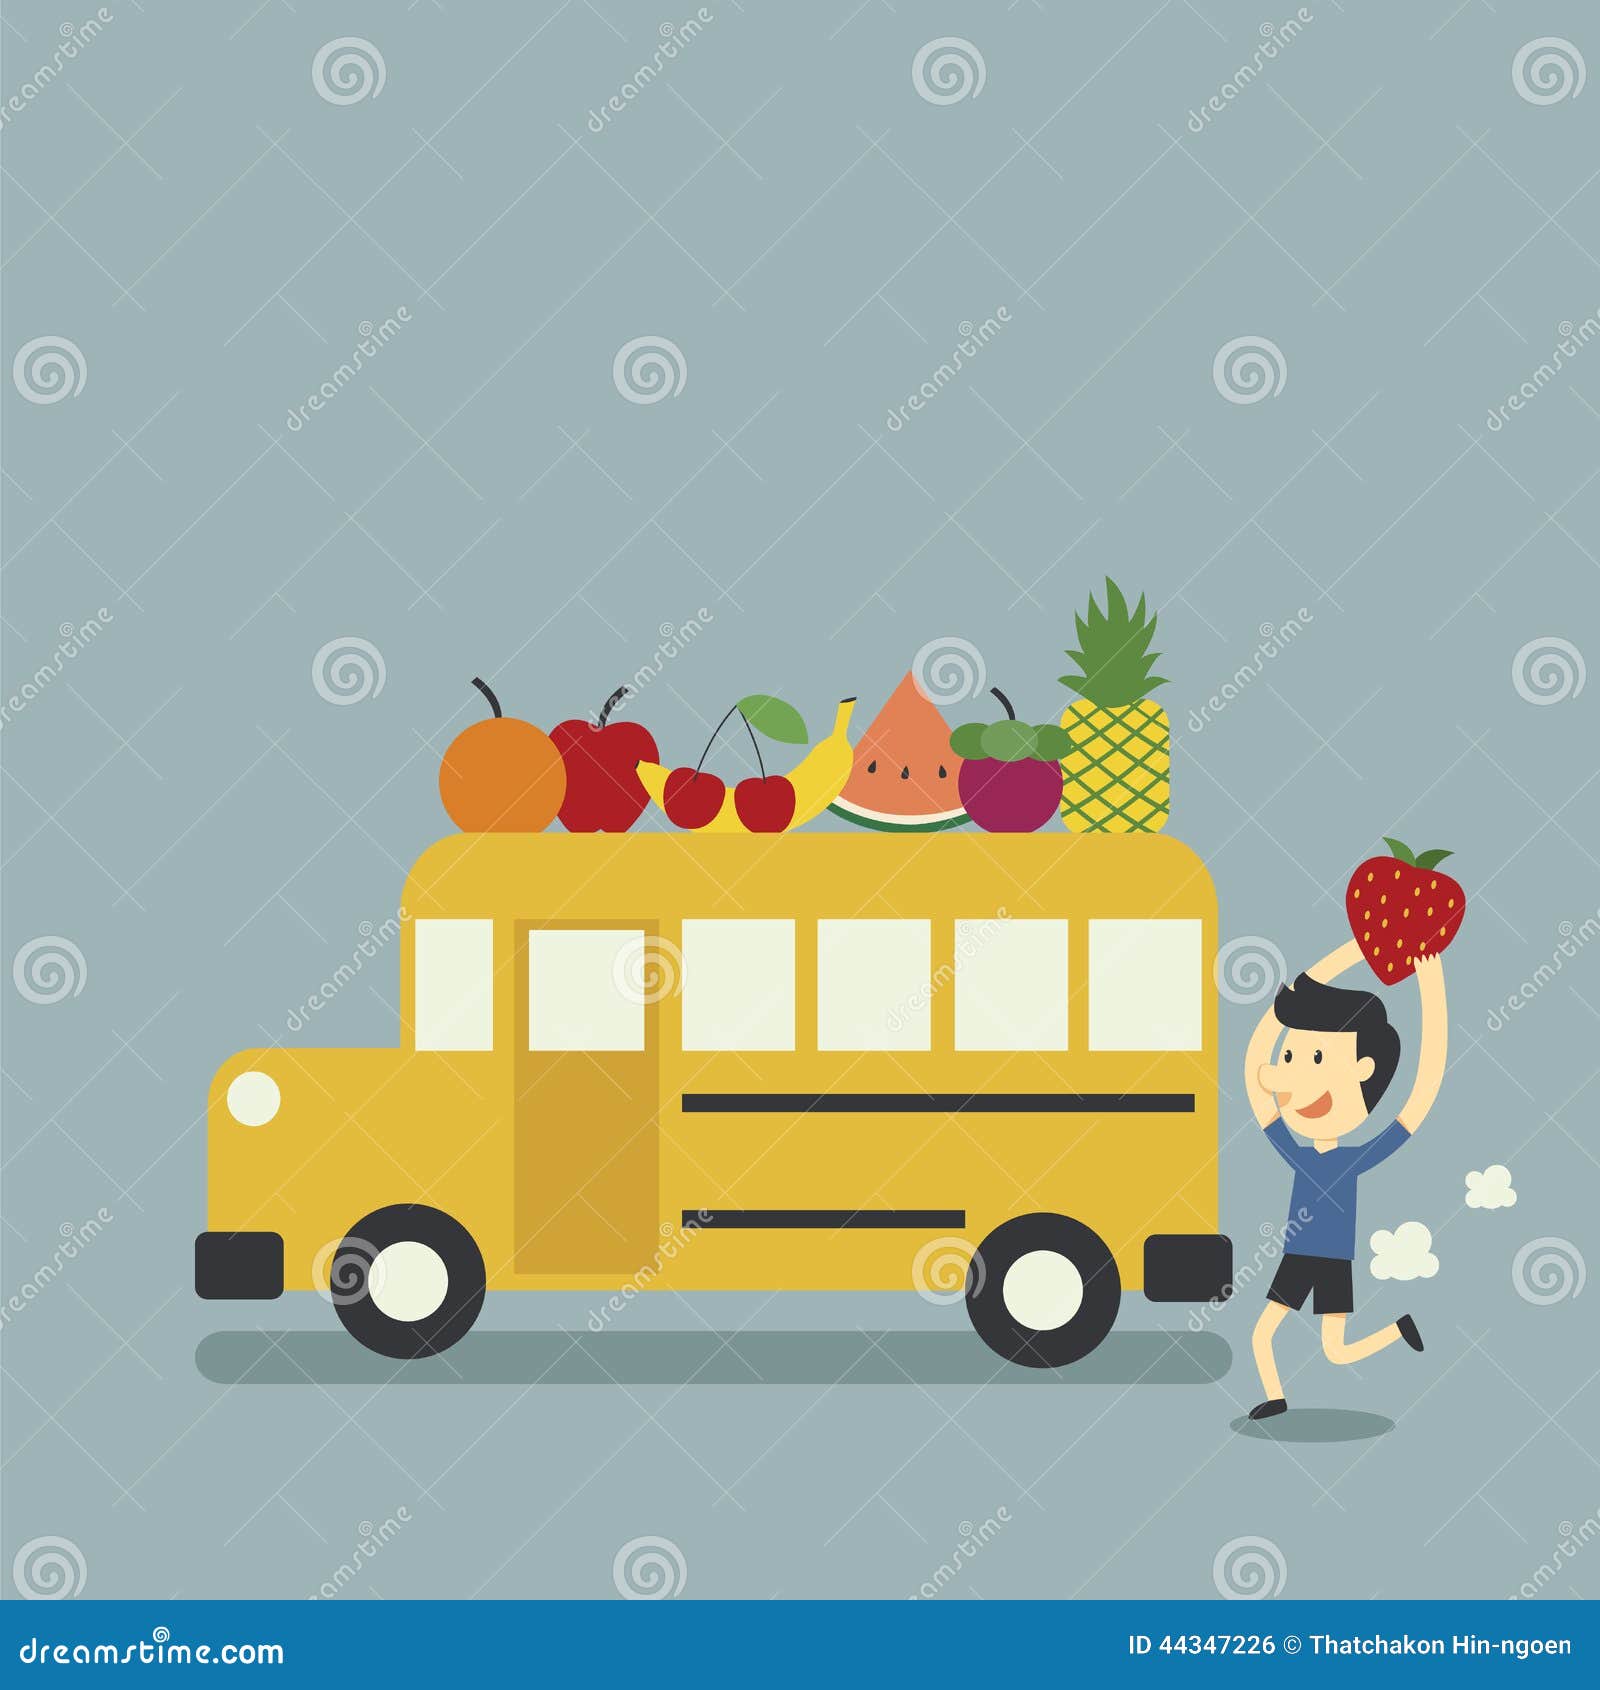 school bus and fruit